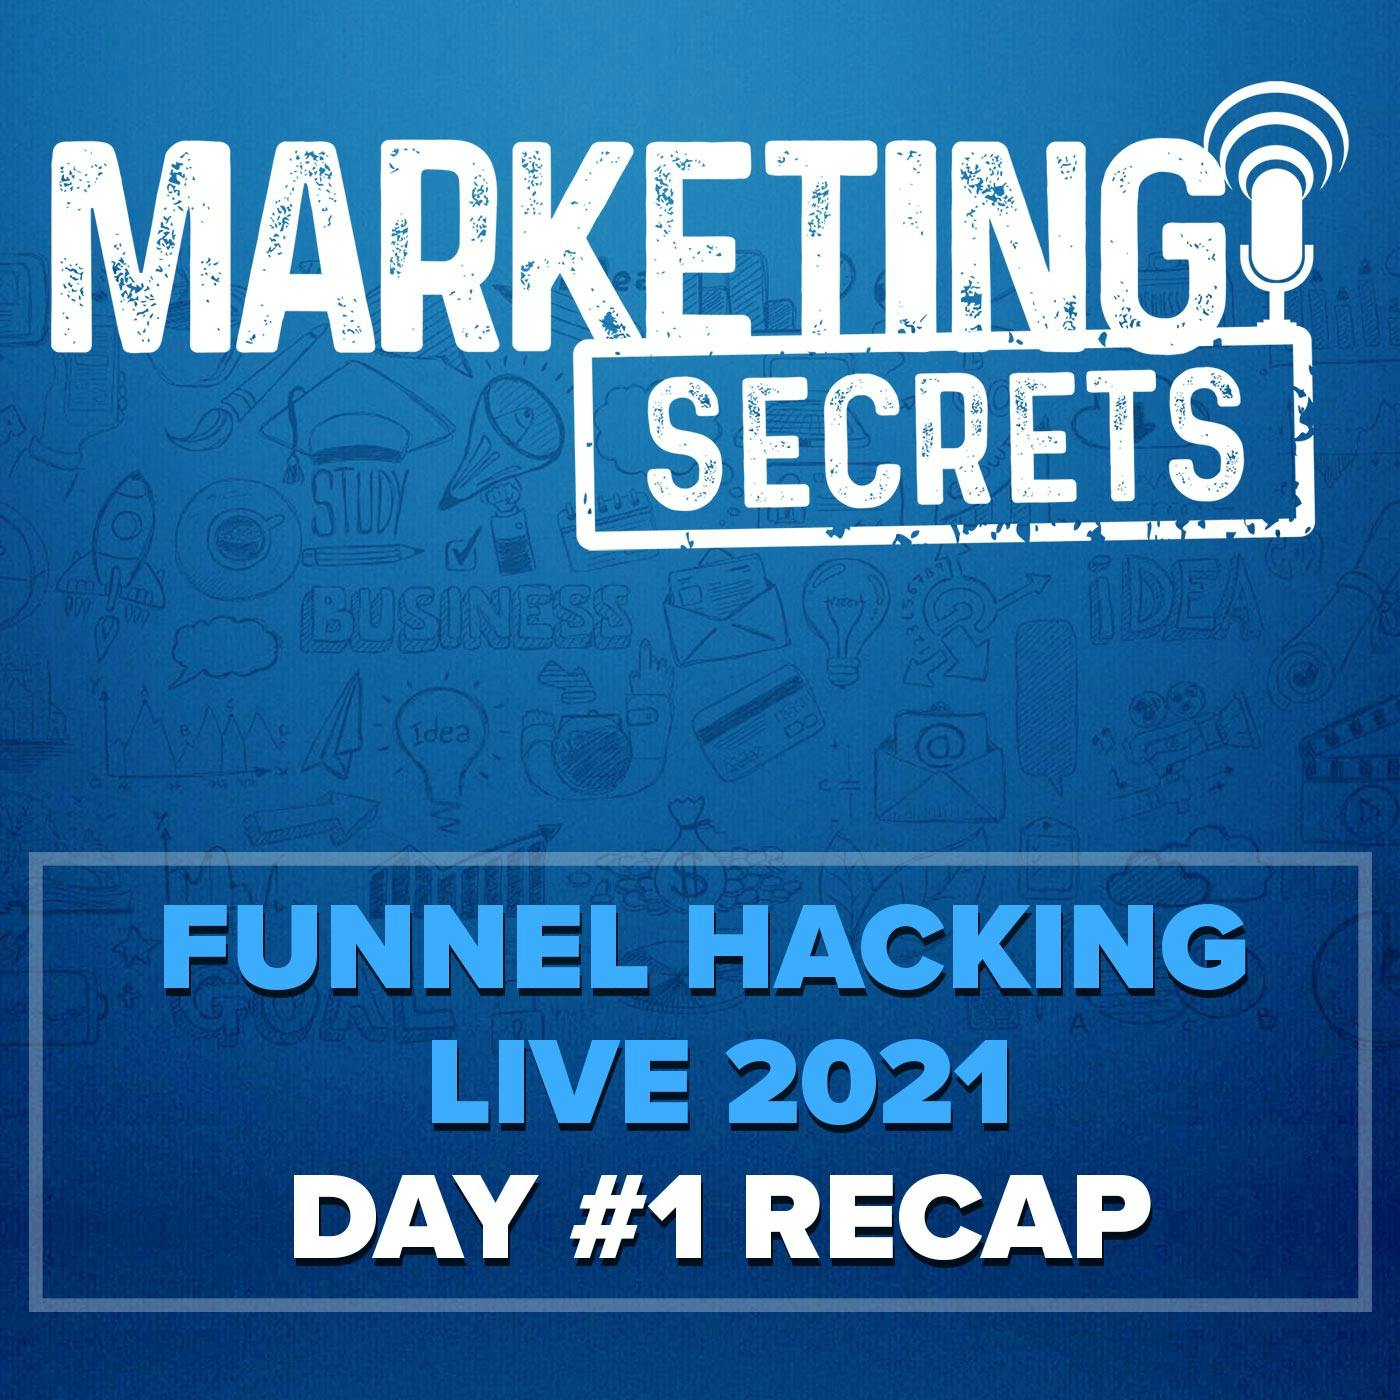 Funnel Hacking Live 2021 - Day #1 Recap